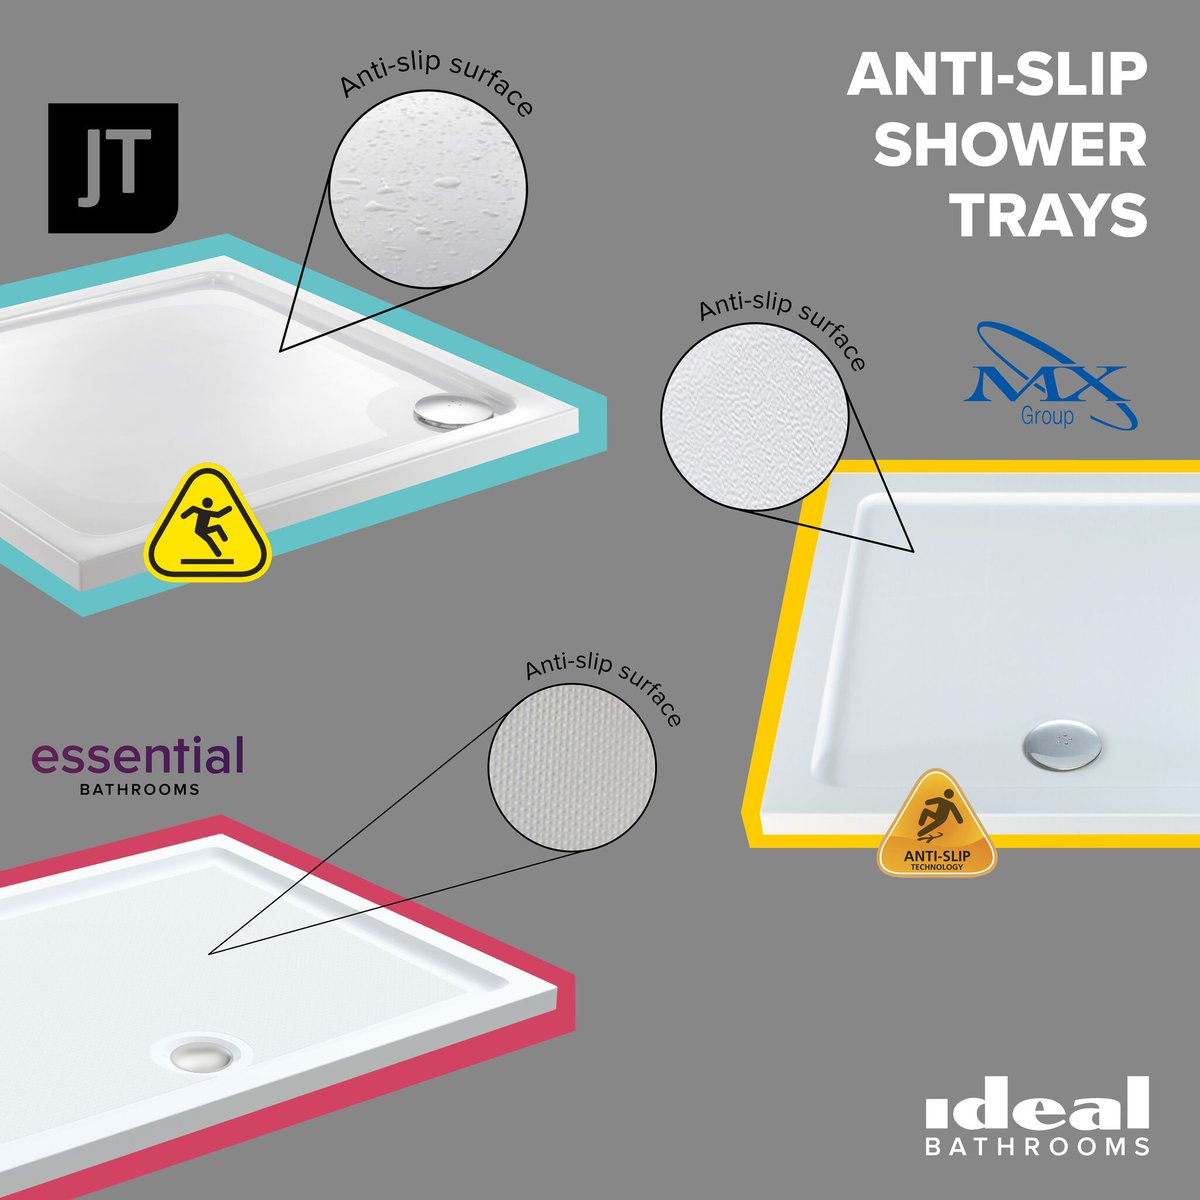 Stay safe whilst in the shower 🚿 with anti-slip shower trays ⚠ We have invested heavily in our stock, meaning all anti-slip trays in stock ✅ and ready to go 🚚 For more information, visit idealbathrooms.com today #antislipshowertrays #stockinvestment